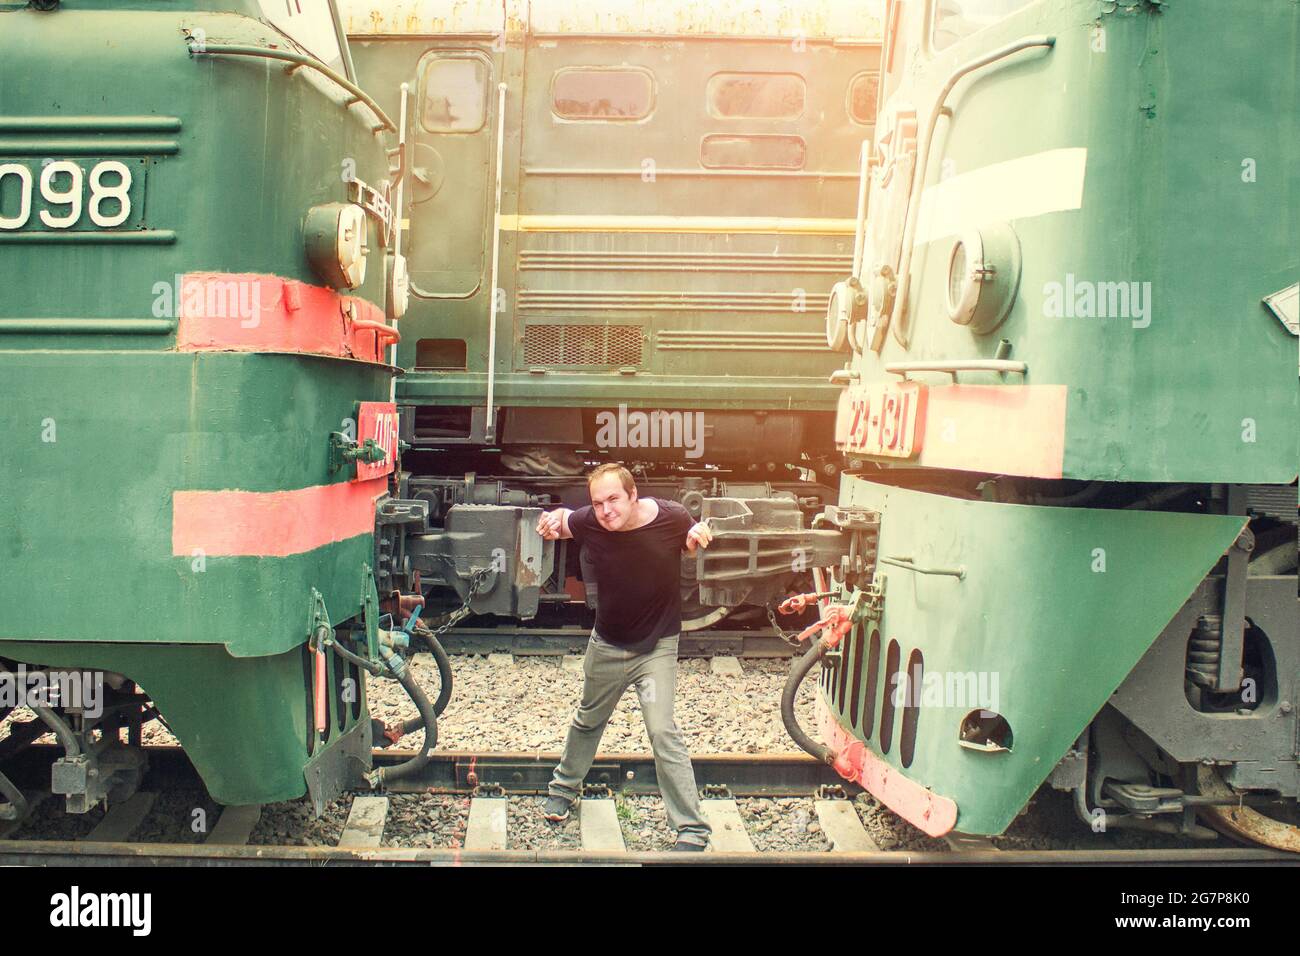 A man clamped in a Vice between two cars. Color photo of a man constrained by circumstances. The guy on the tracks is trapped by machinery. Stock Photo